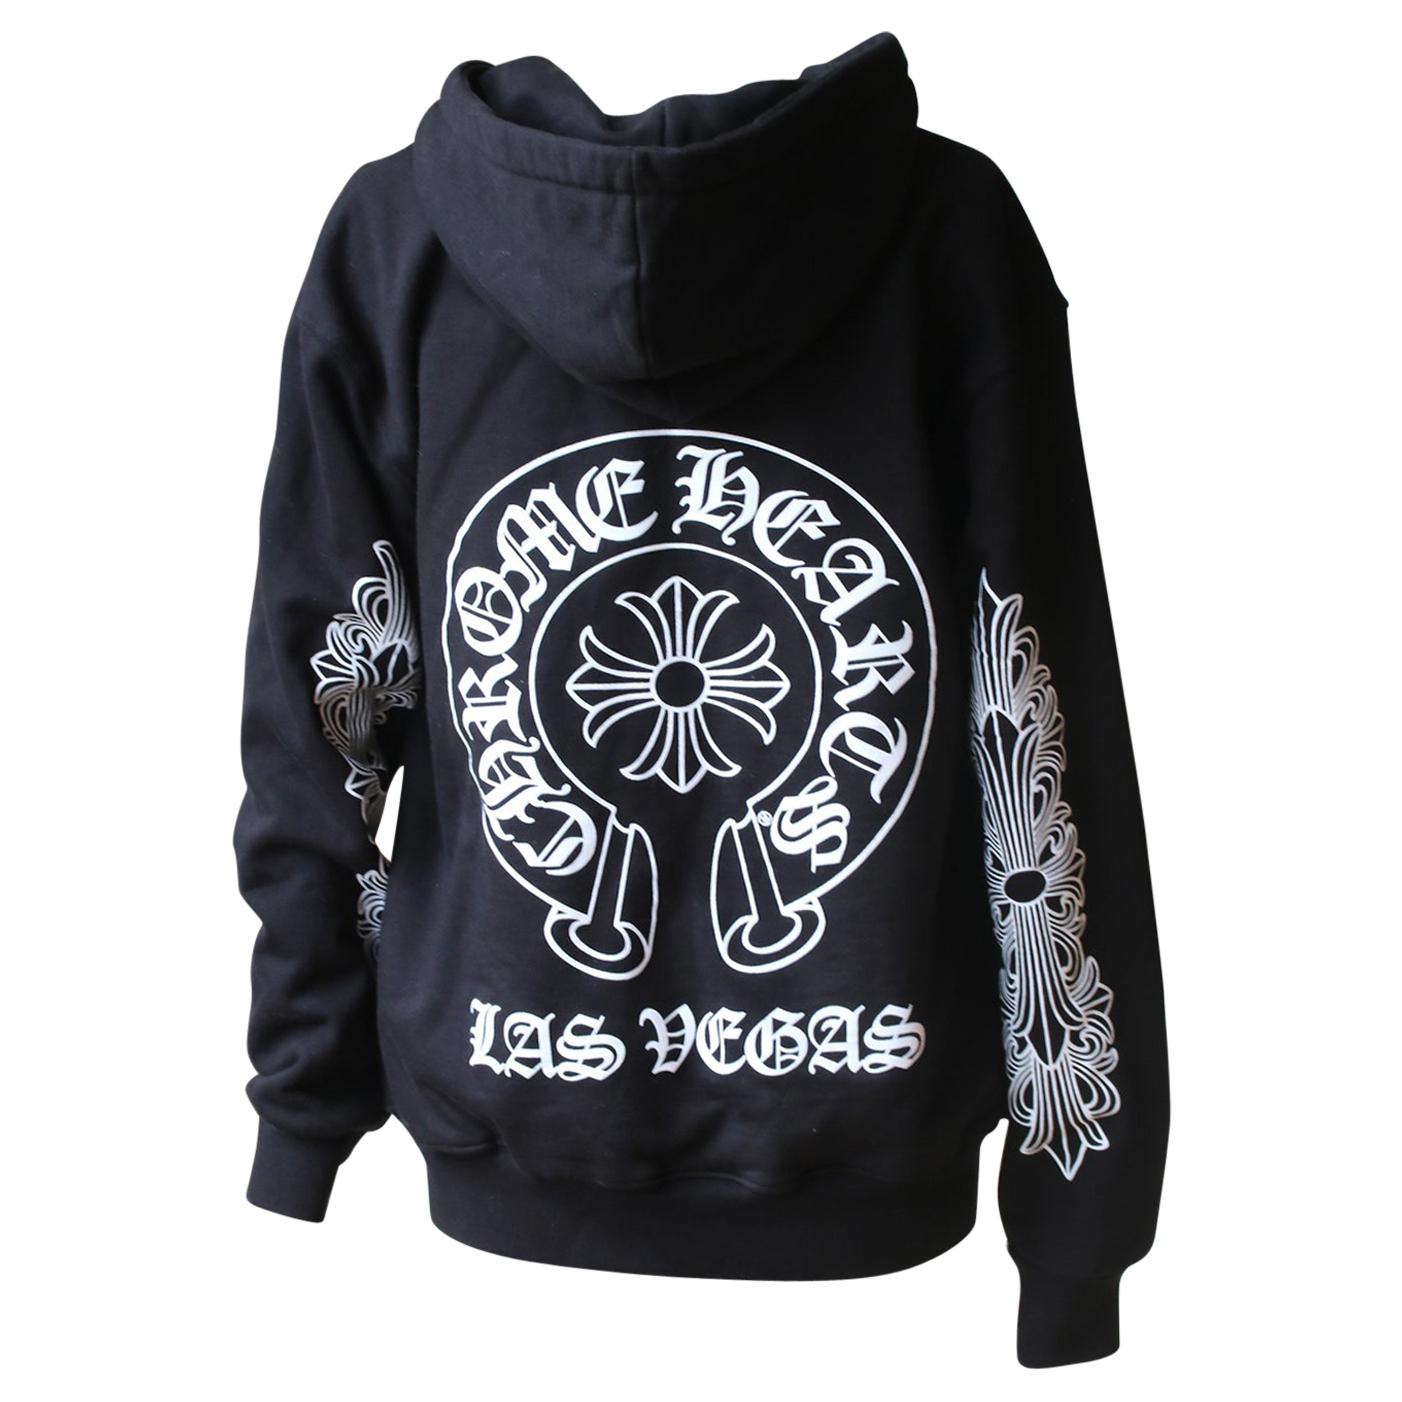 Chrome Hearts Black & Red Welcome To Las Vegas Hoodie – Savonches